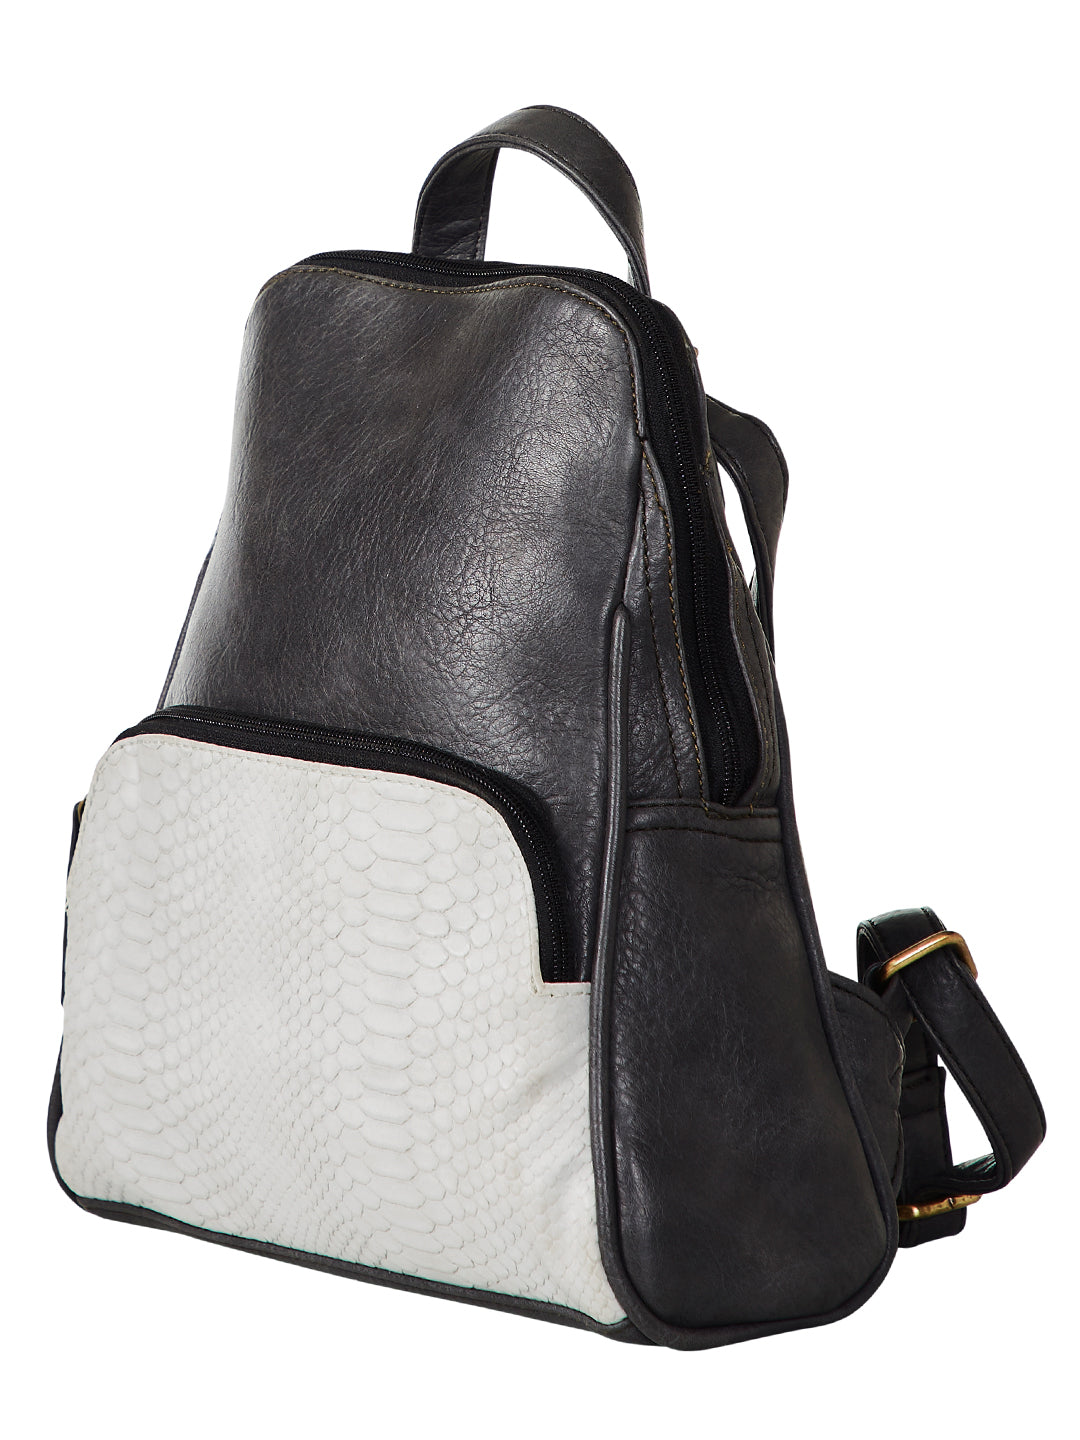 Mona B Convertible Daypack for Offices Schools and Colleges with Stylish Design for Women: Gunmetal